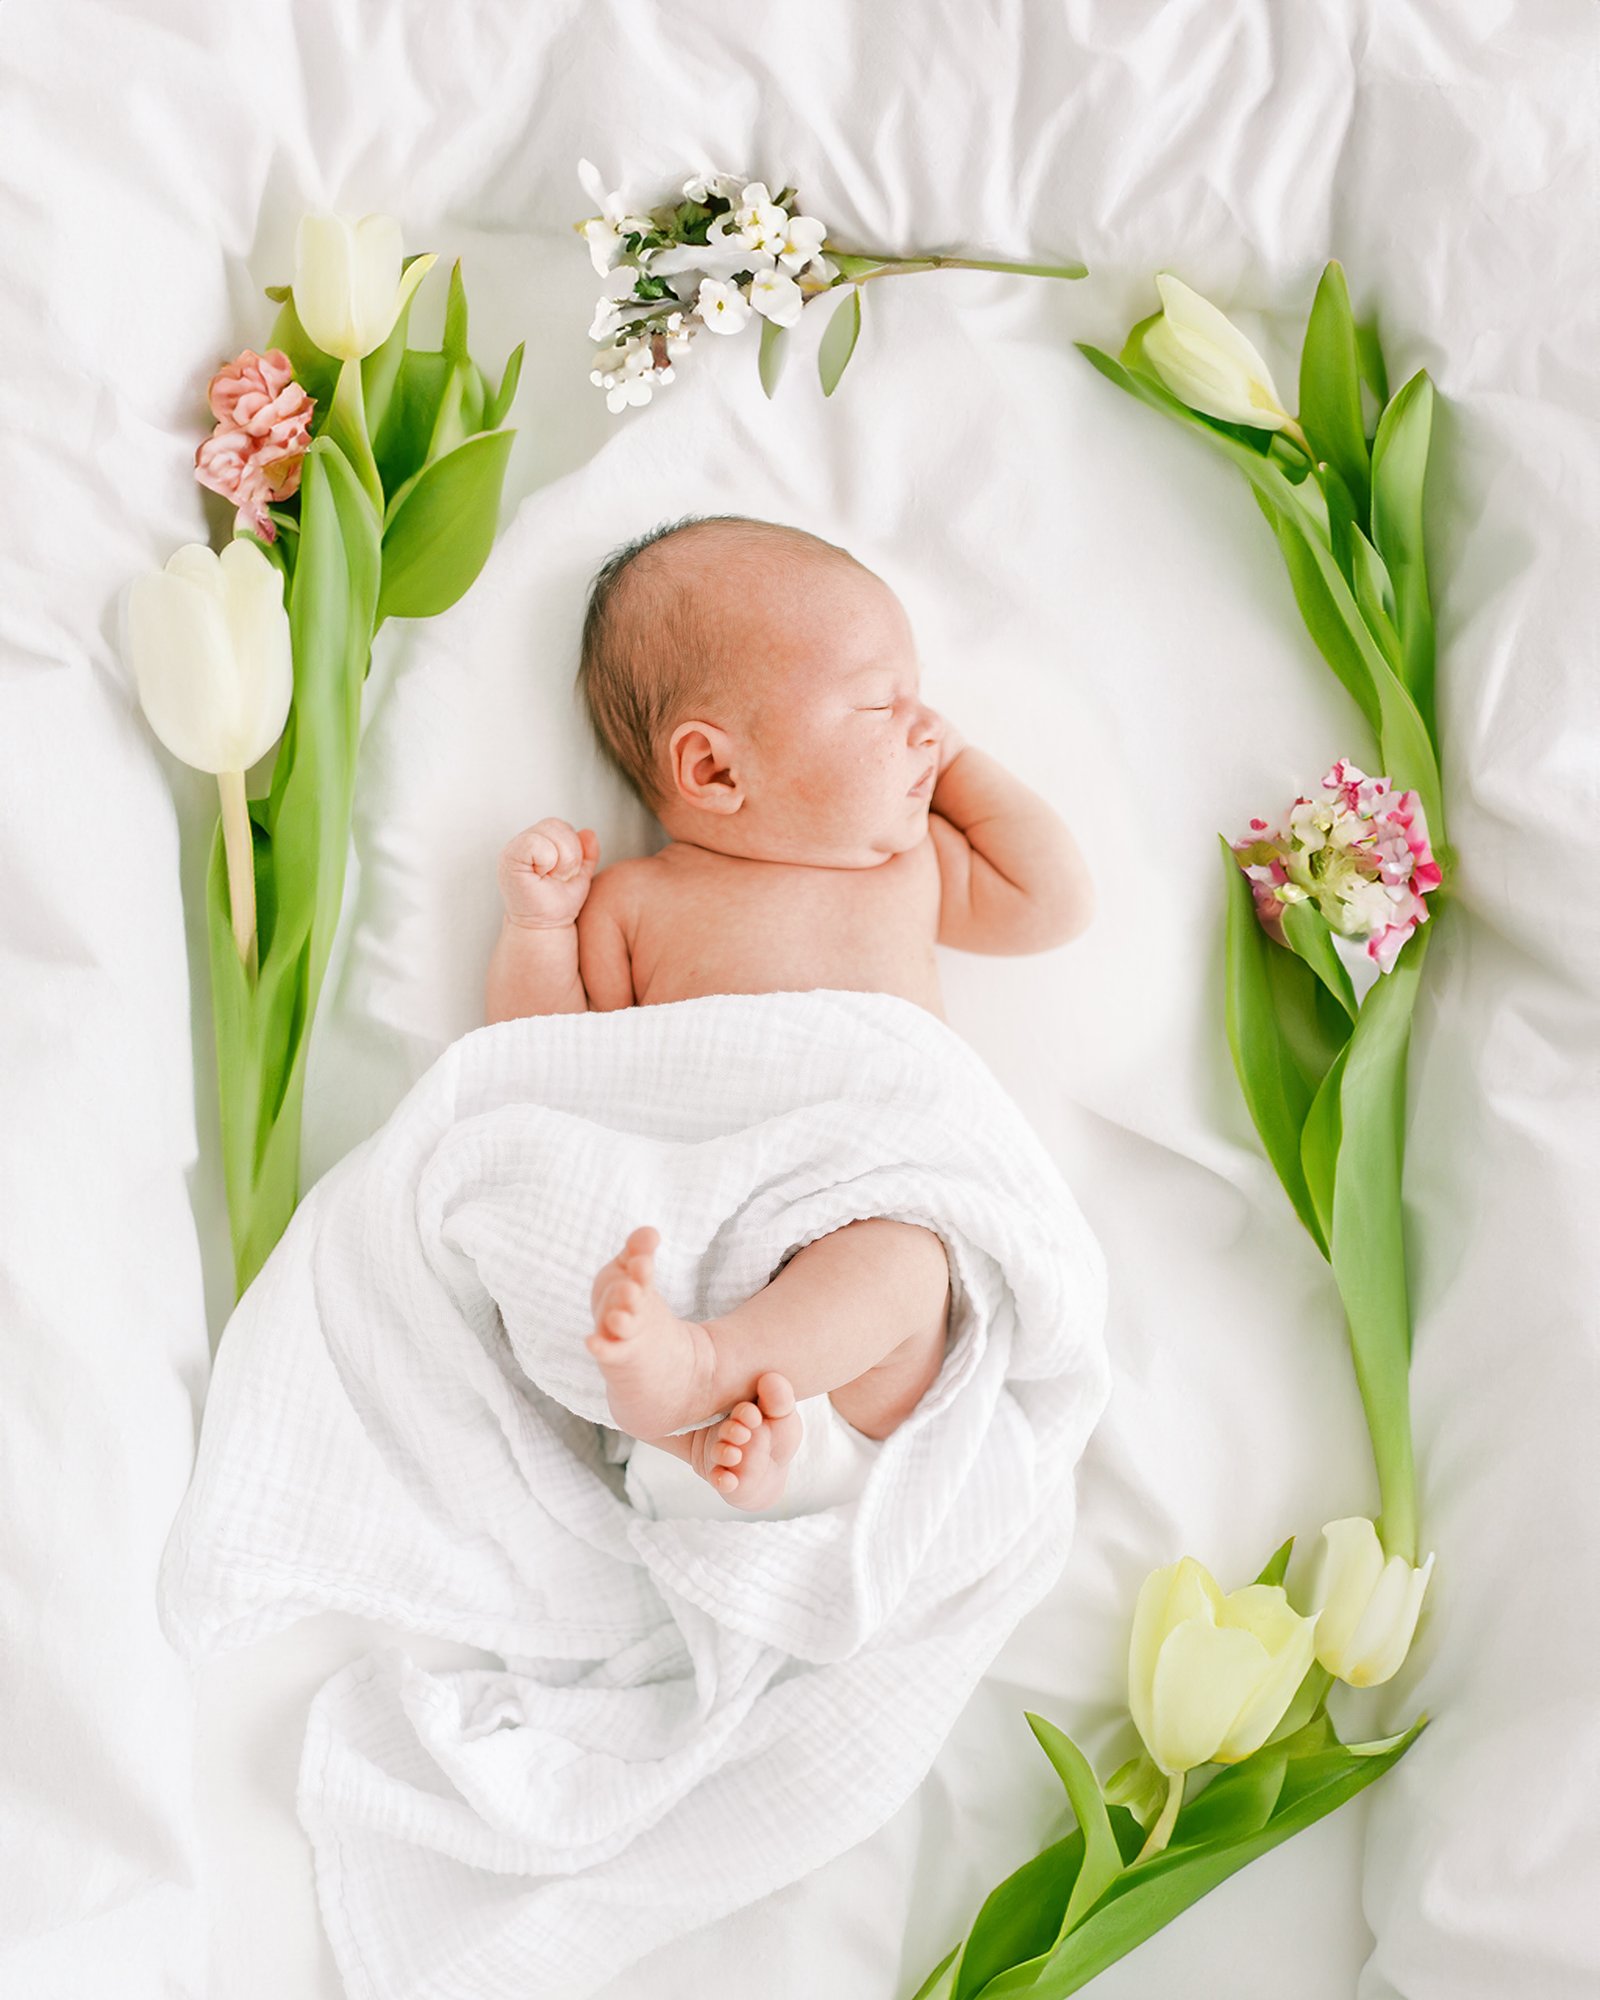 Spring Baby Photoshoot Ideas - Baby Surrounded by Flowers